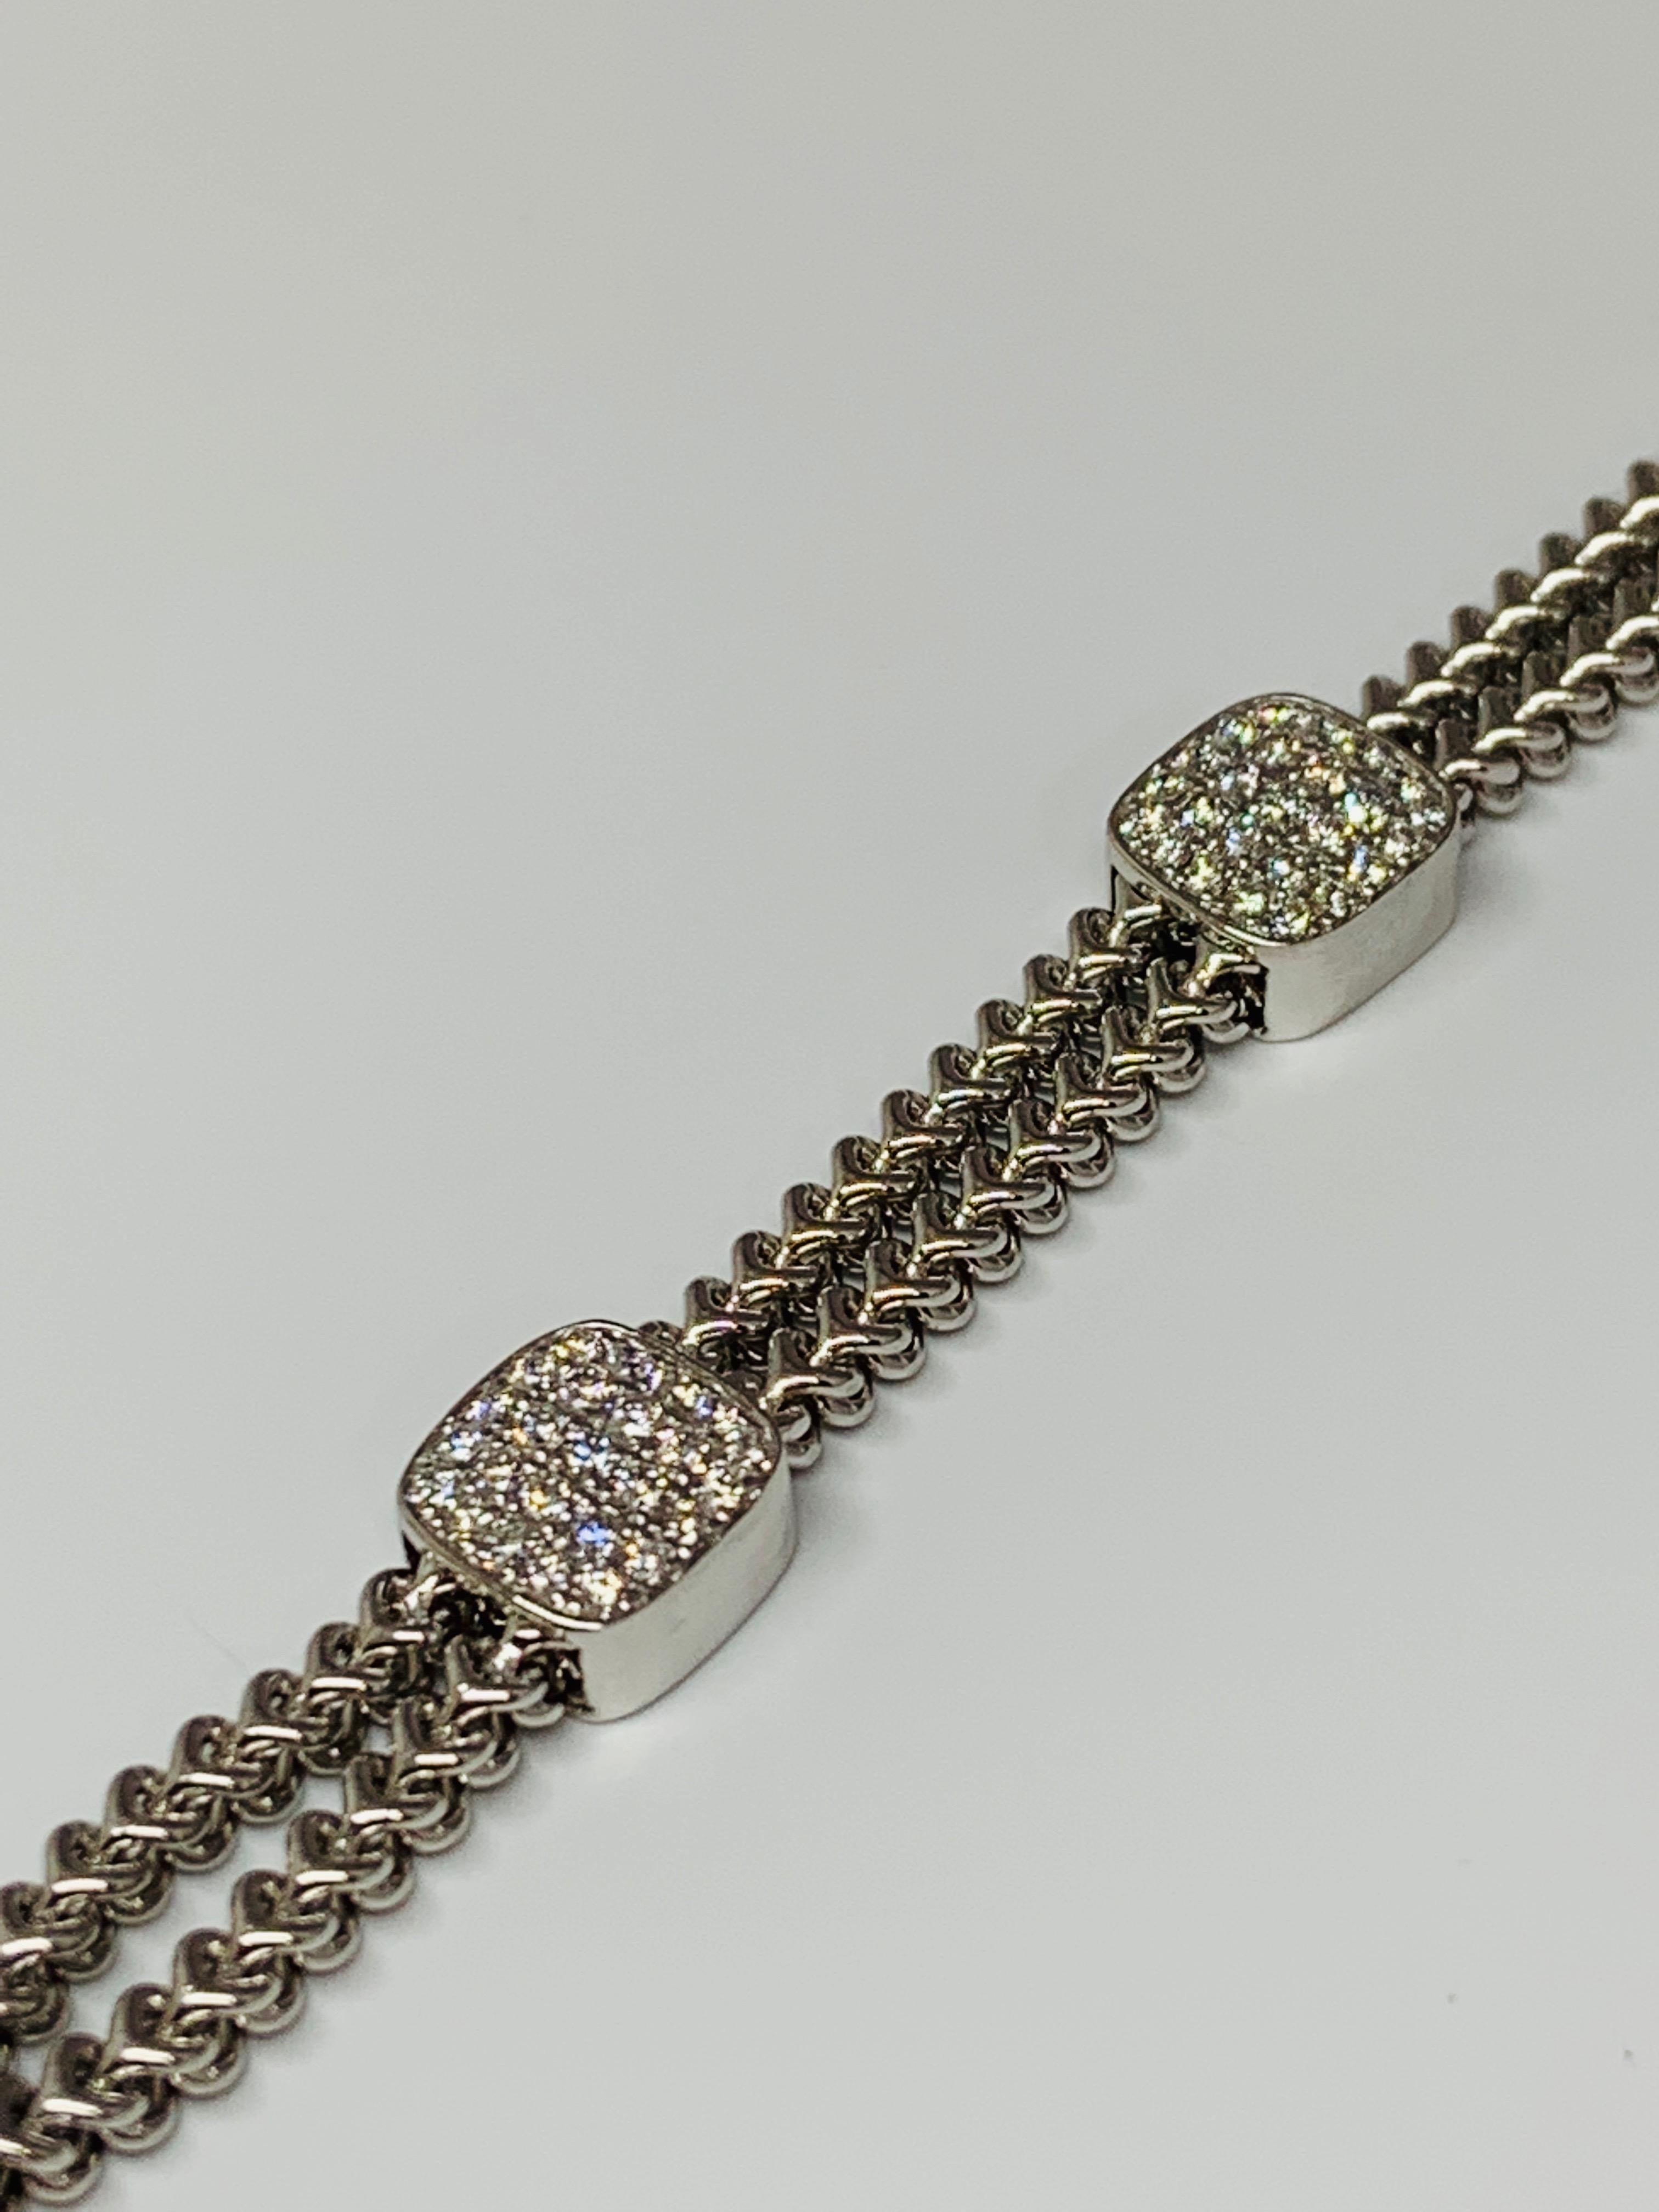 This unique piece features five diamond cluster stations on a double chain bracelet. The double chain provides incredible comfort during wear time and includes a sturdy box clasp. The diamond stations total 1.50 carats of round white diamonds. This